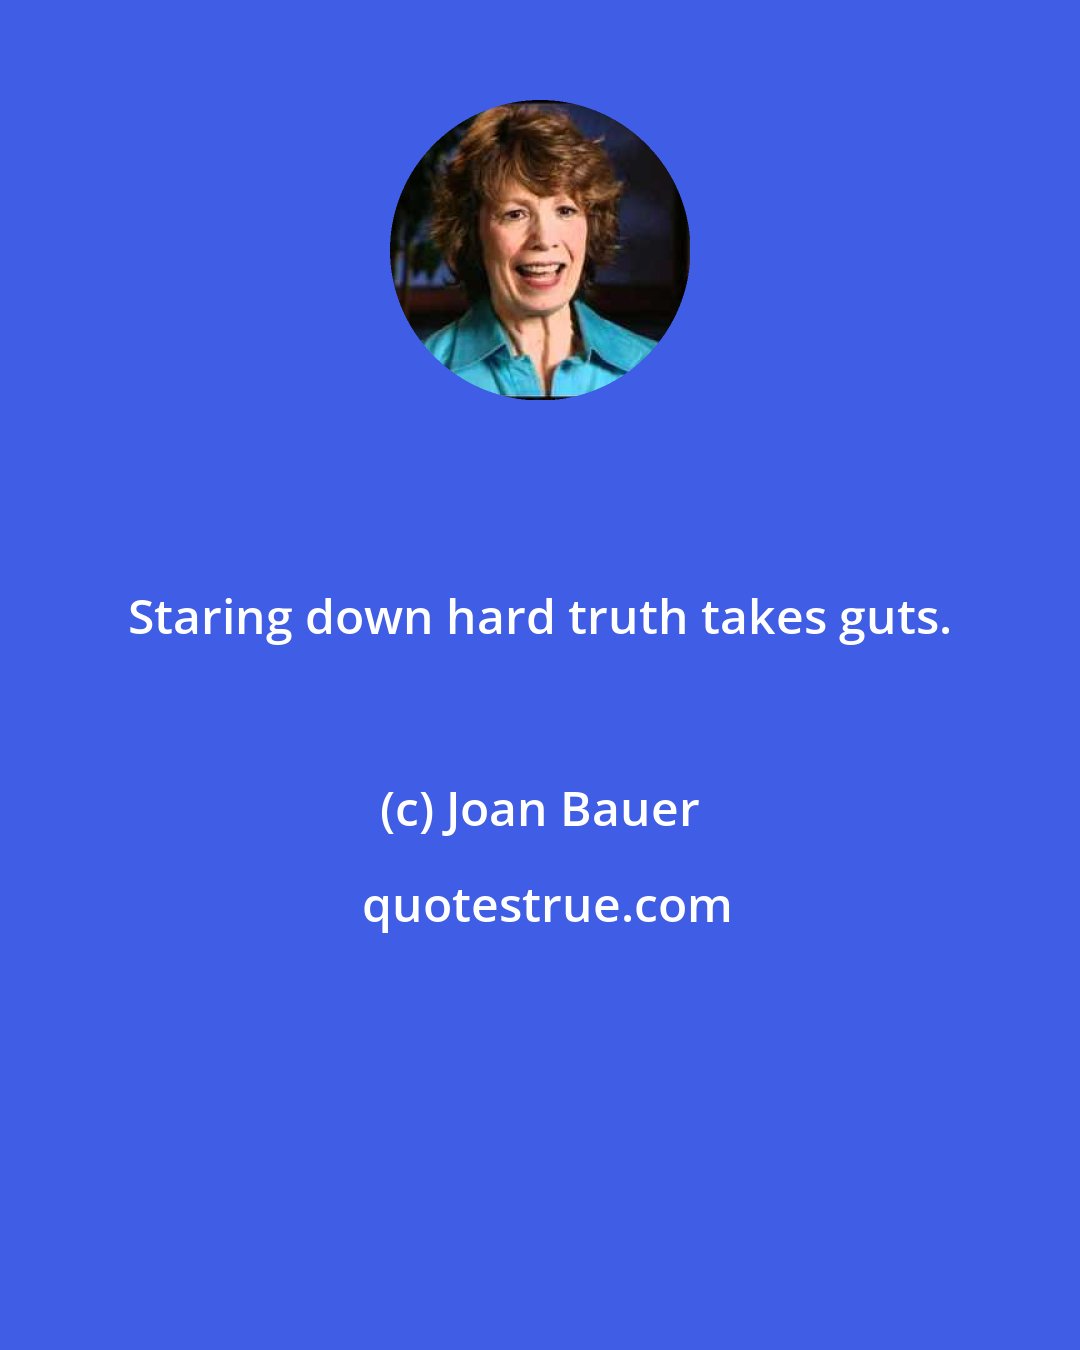 Joan Bauer: Staring down hard truth takes guts.